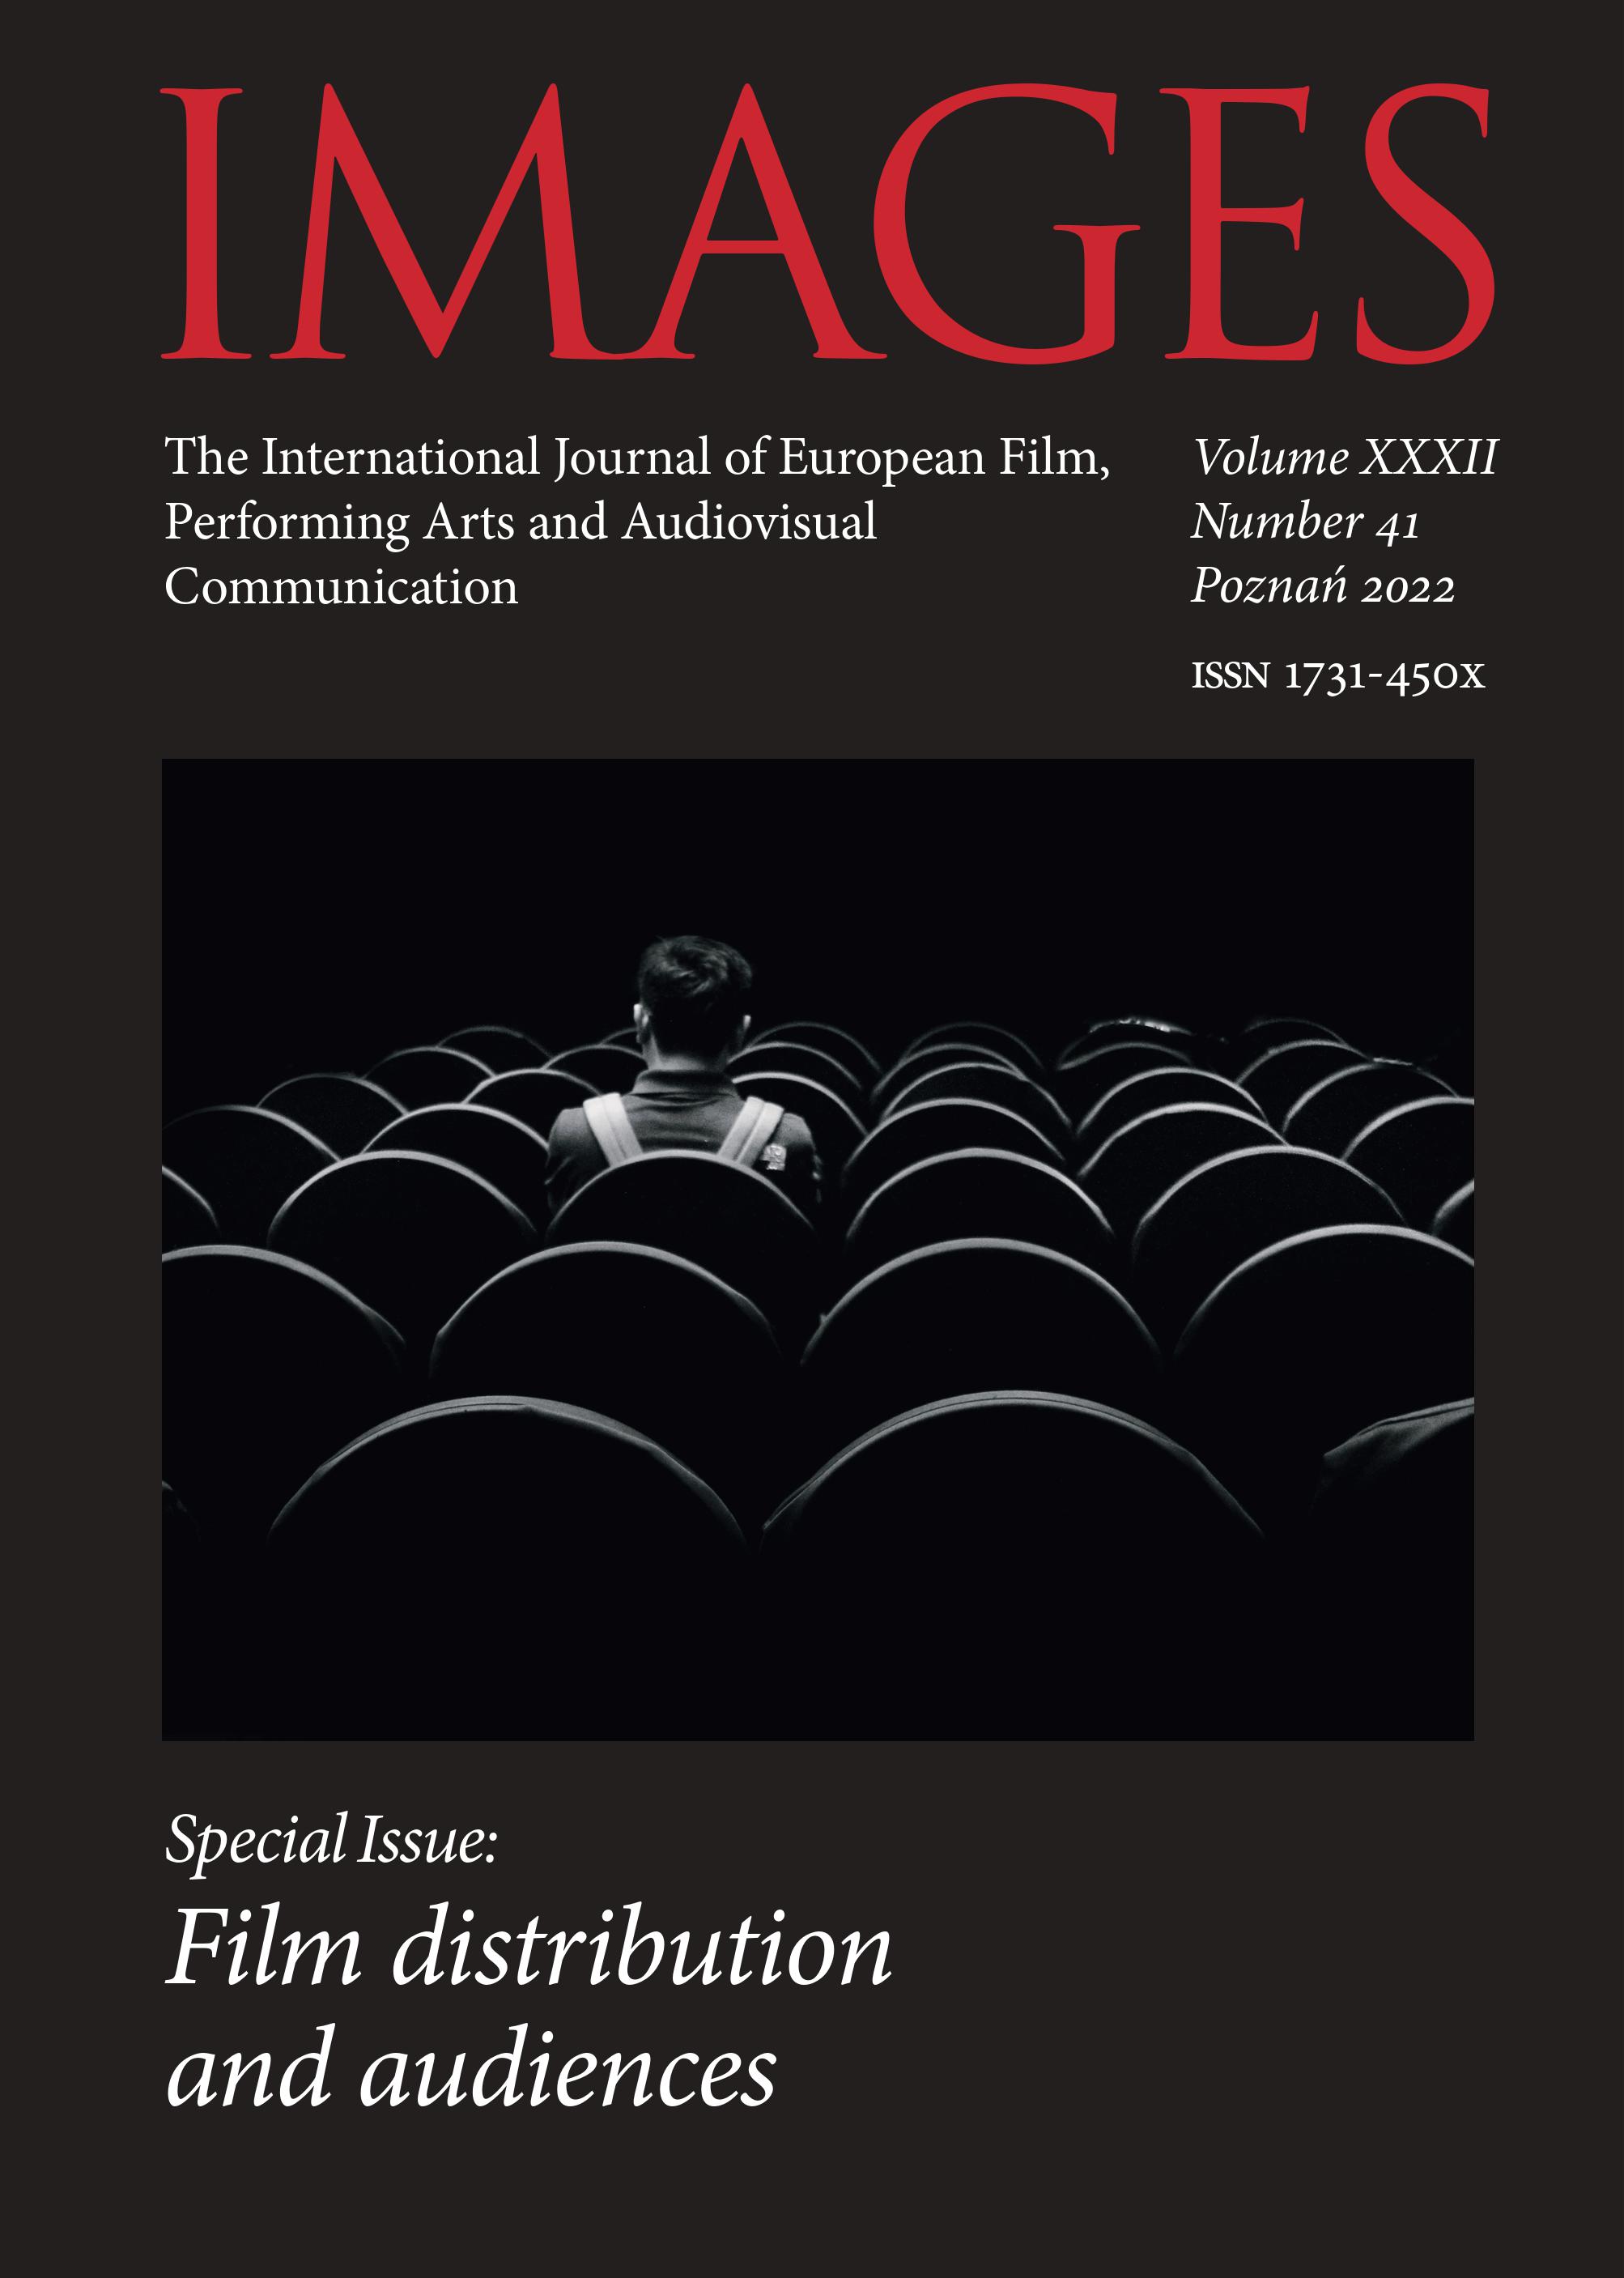 Local and Global Framework of Early Cinema in Lithuania: Vilnius Cinemas, Programme Formats and Audience